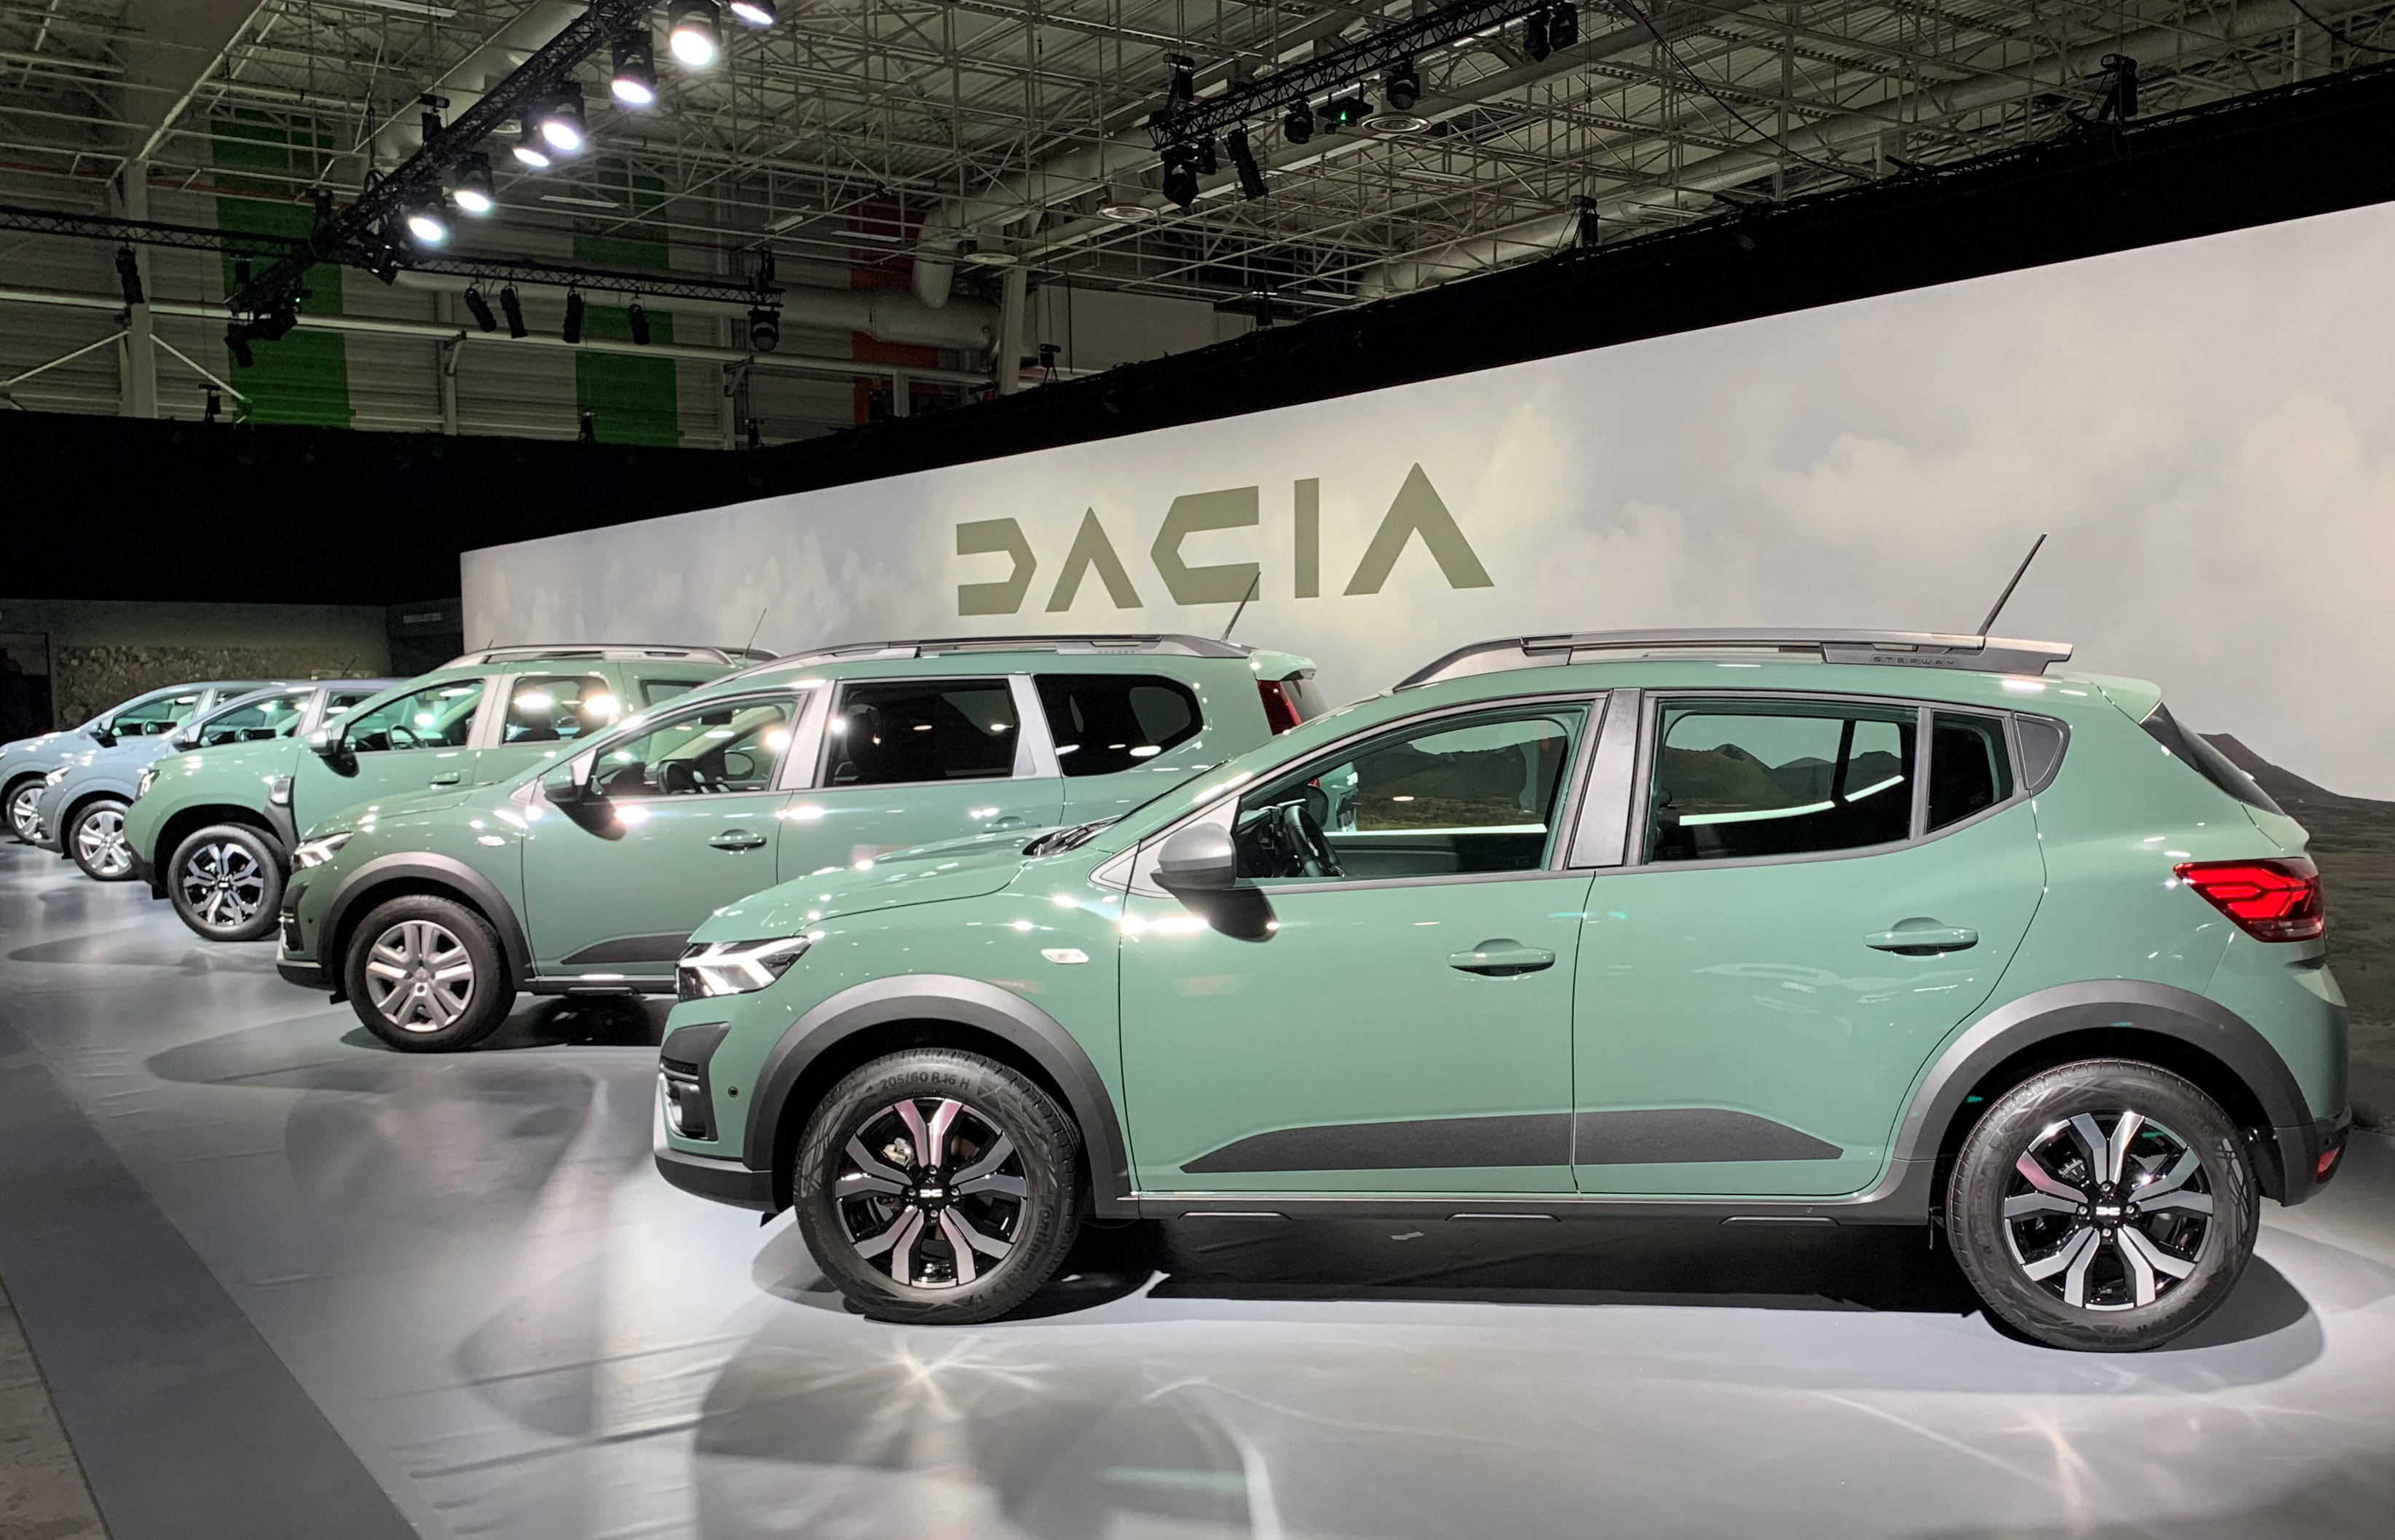 Renault's low cost brand Dacia holds event in Le Bourget